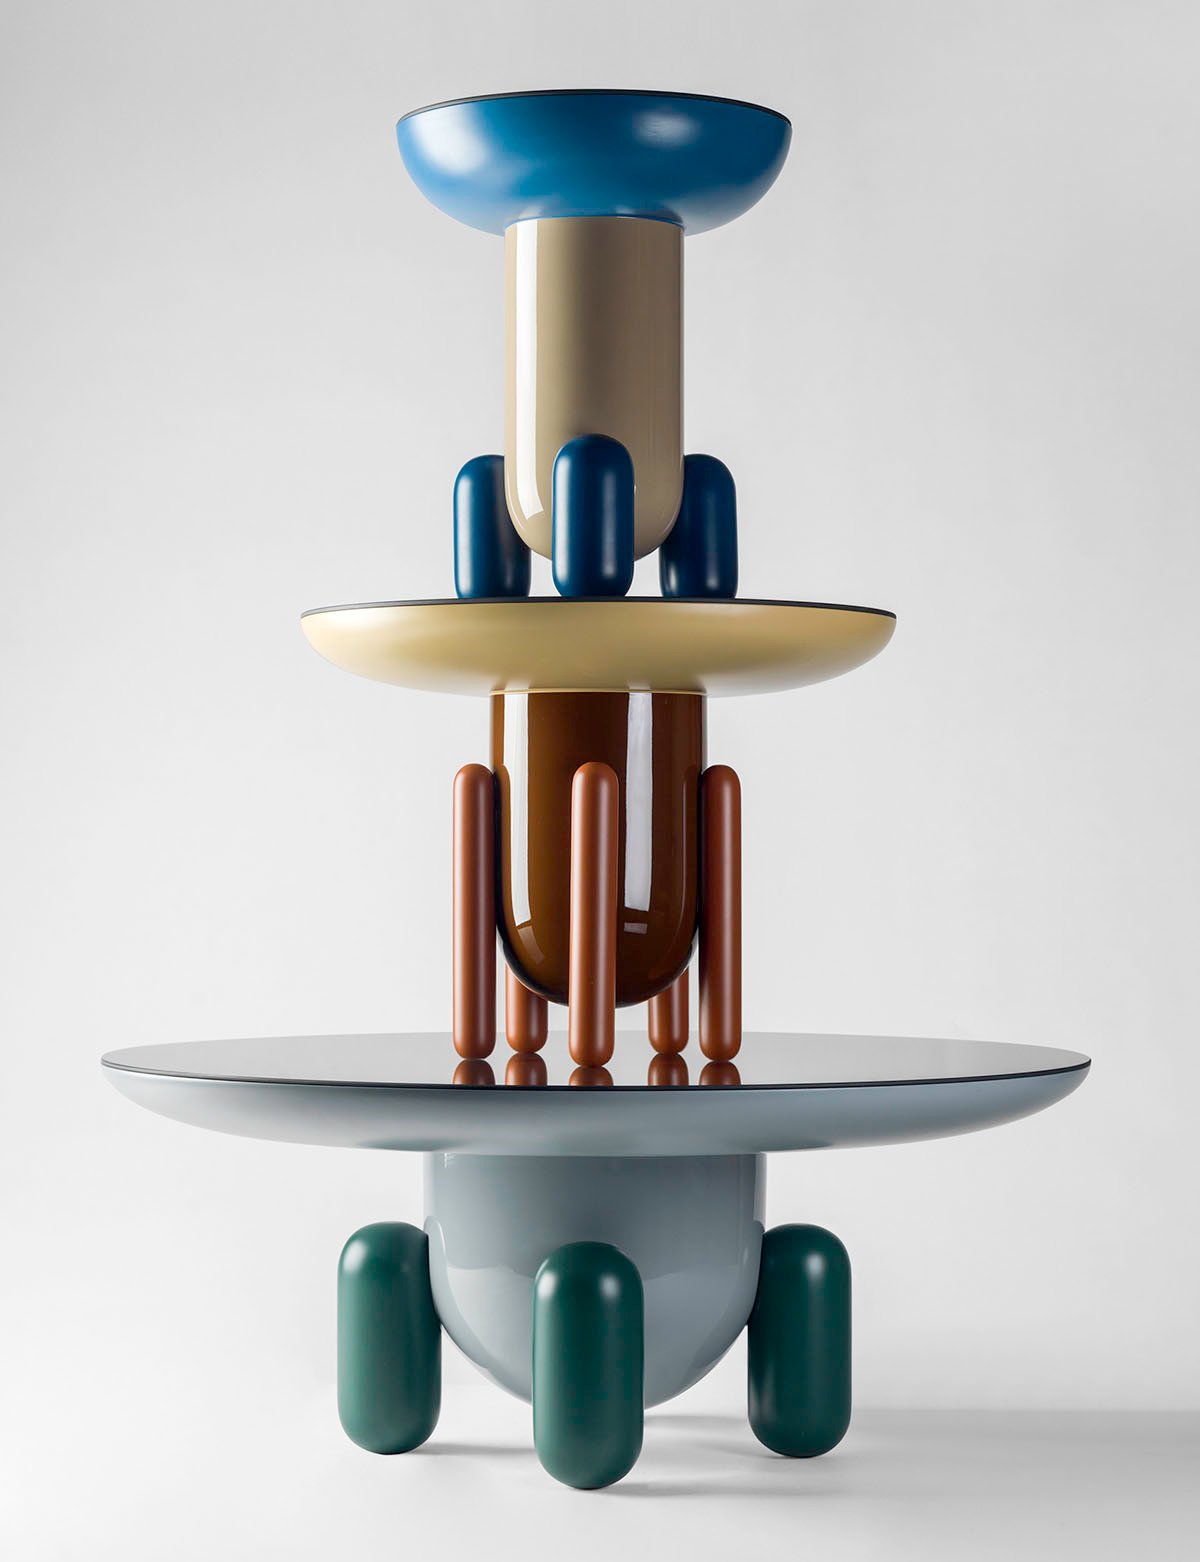 EXPLORER TABLES by Jaime Hayon for BD Barcelona.